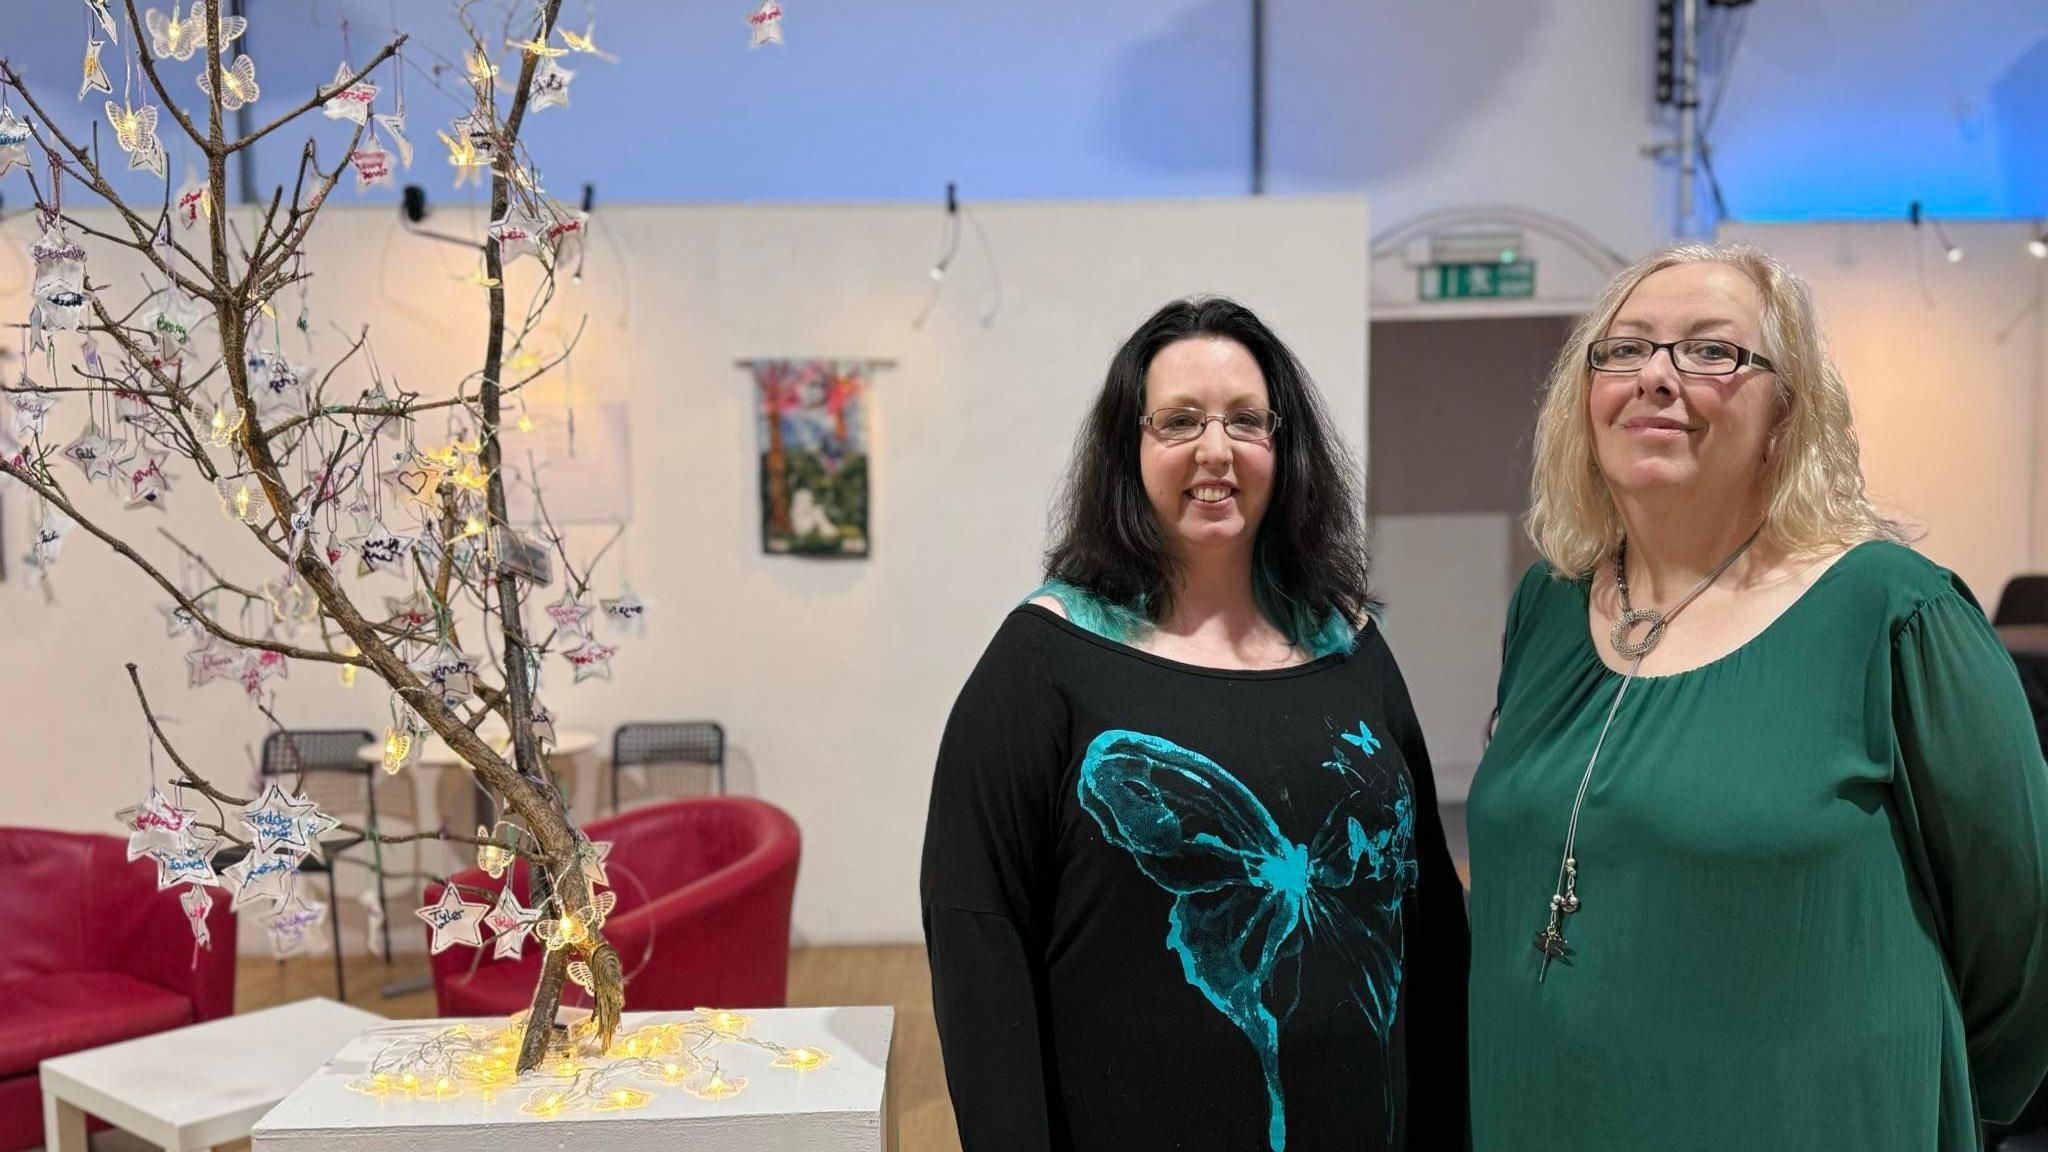 Mel Scott and Sarah Jay Hargreaves at the exhibition